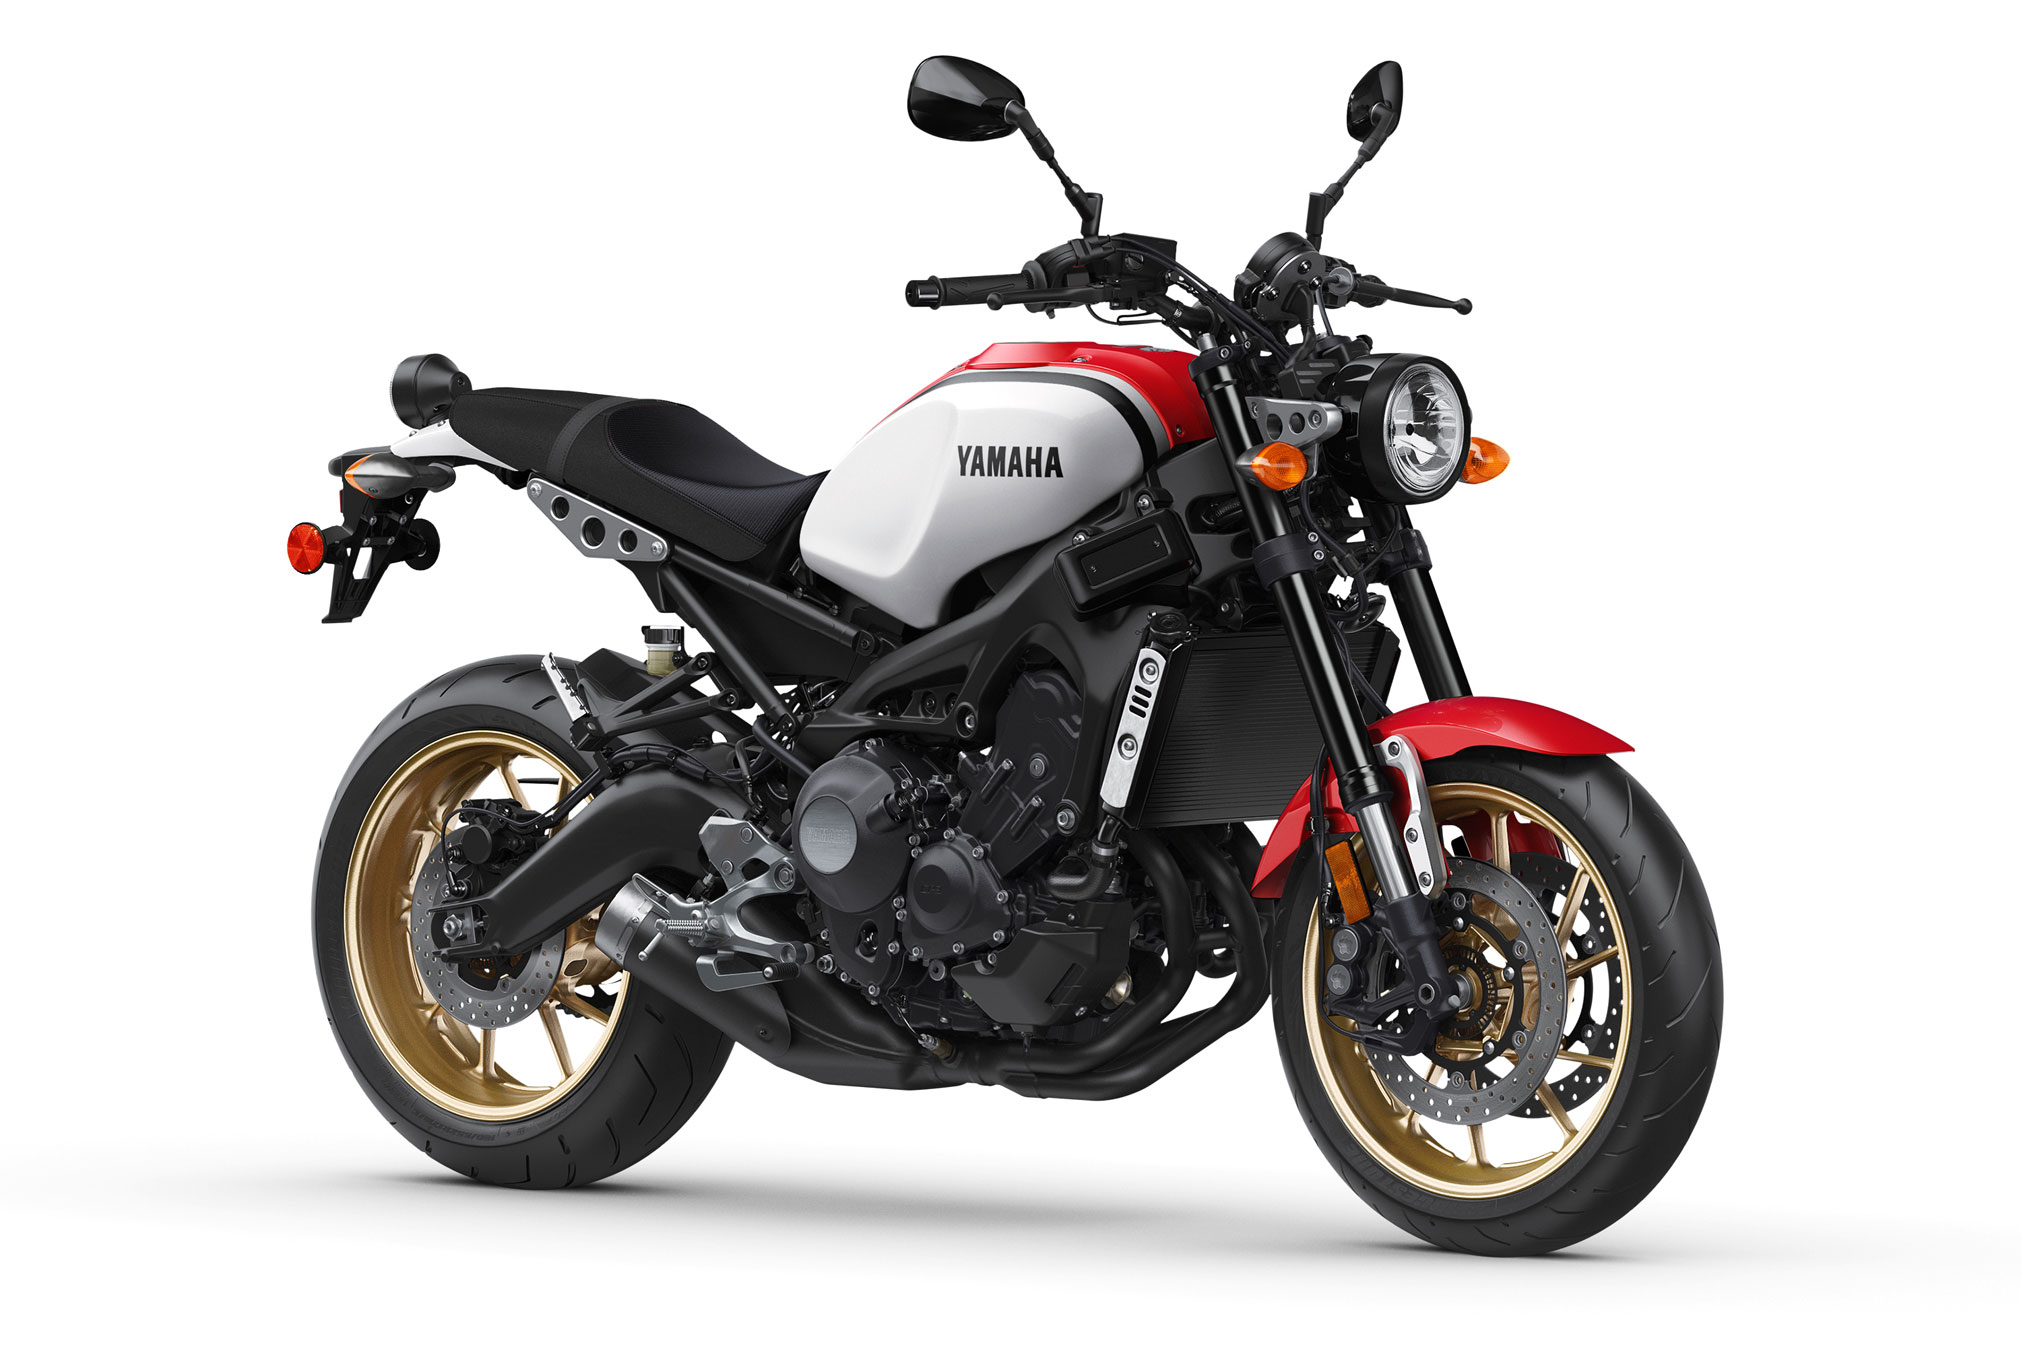 2021 Yamaha XSR900 Guide • Total Motorcycle